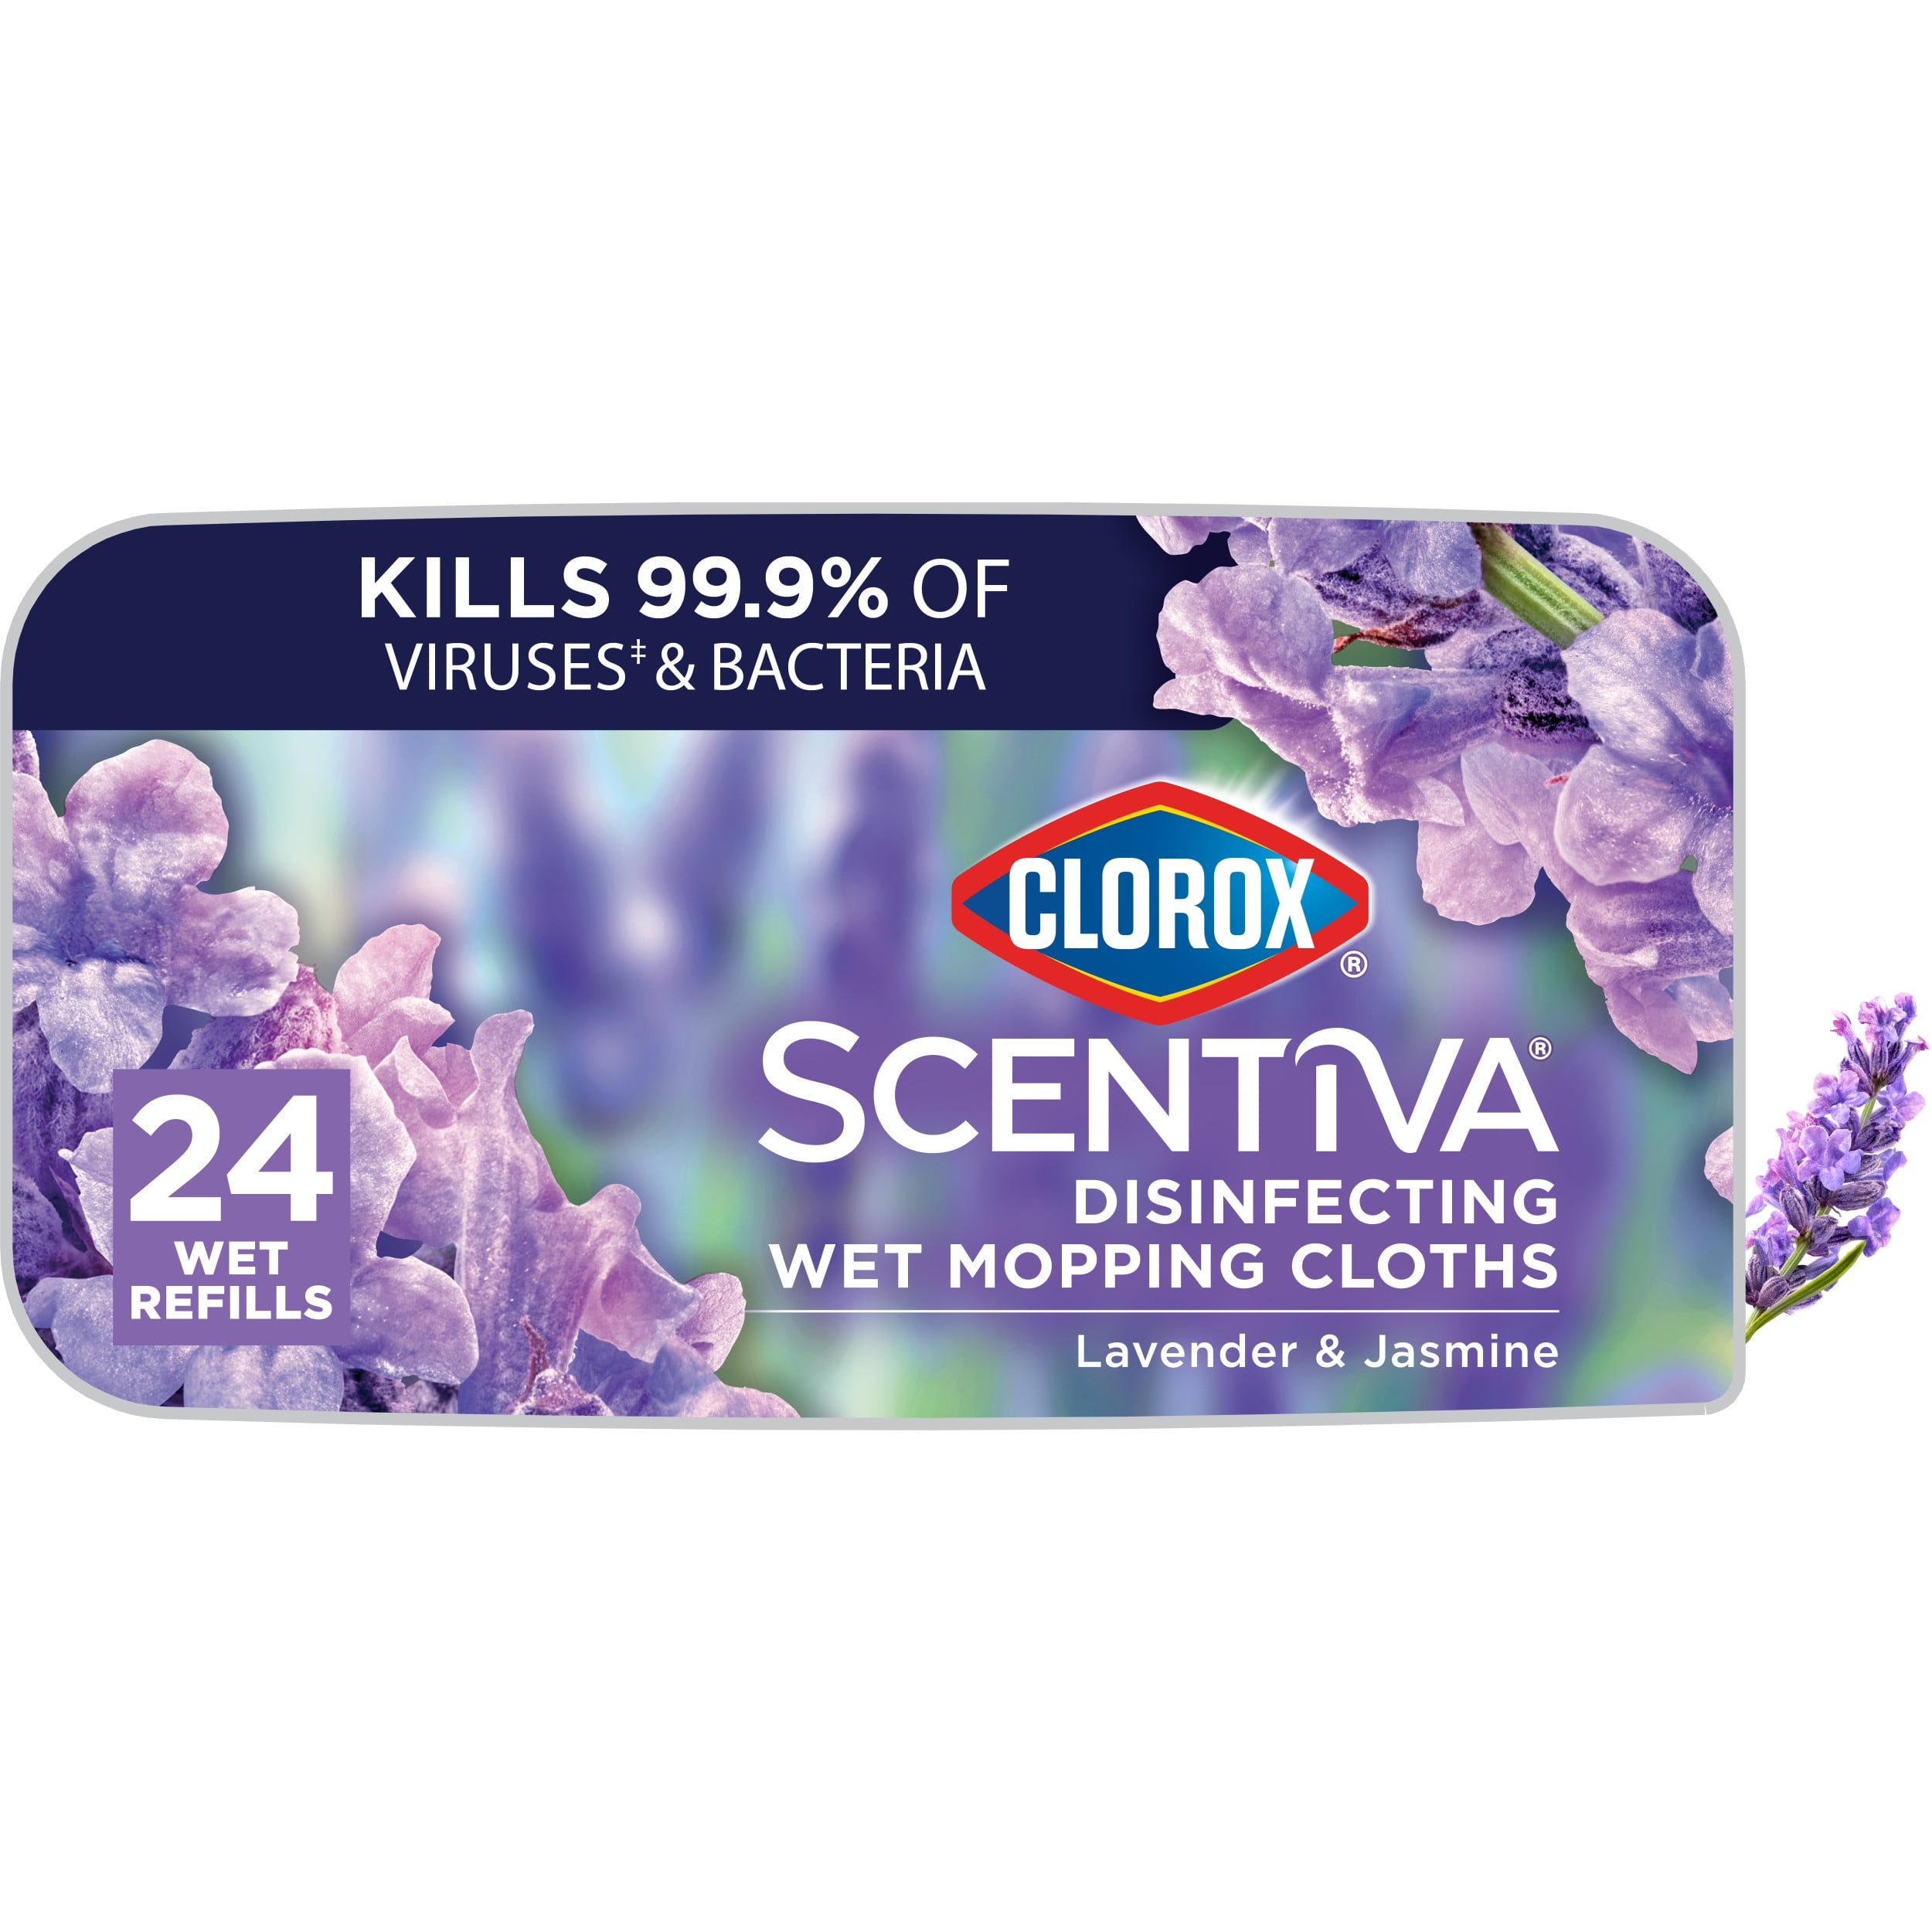 Clorox Scentiva Wet Mopping Cloths Disinfecting Tuscan Lavender Jasmine 24 Refills